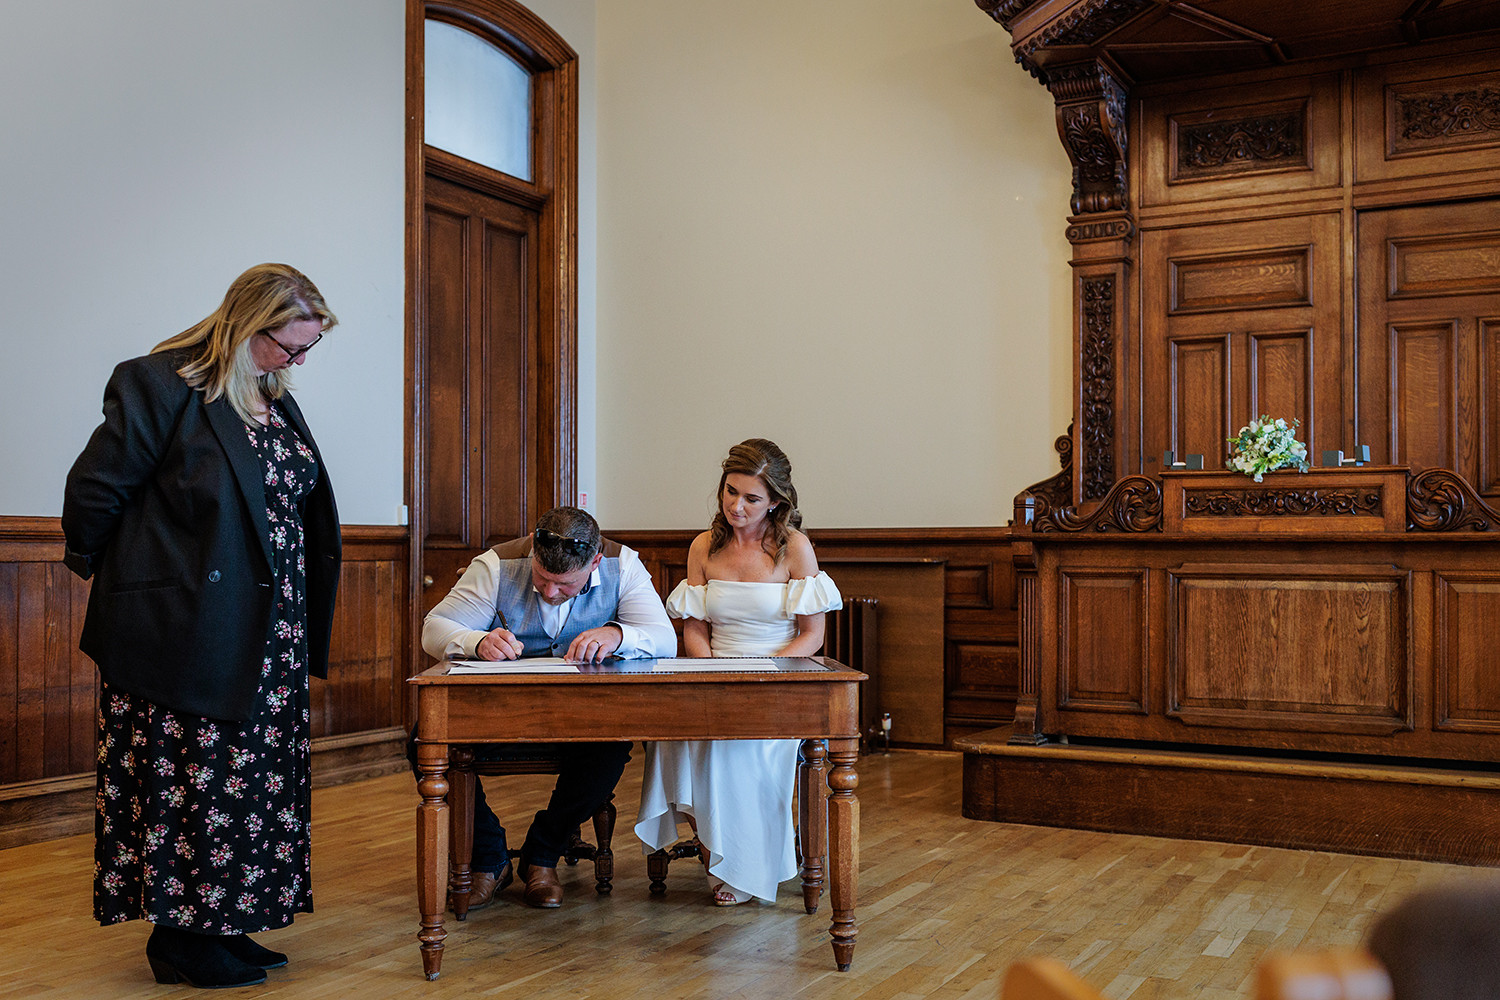 Elope to Jersey - the couple sign the legal marriage certificate after their wedding at The Old Magistrate's Court, Jersey, CI